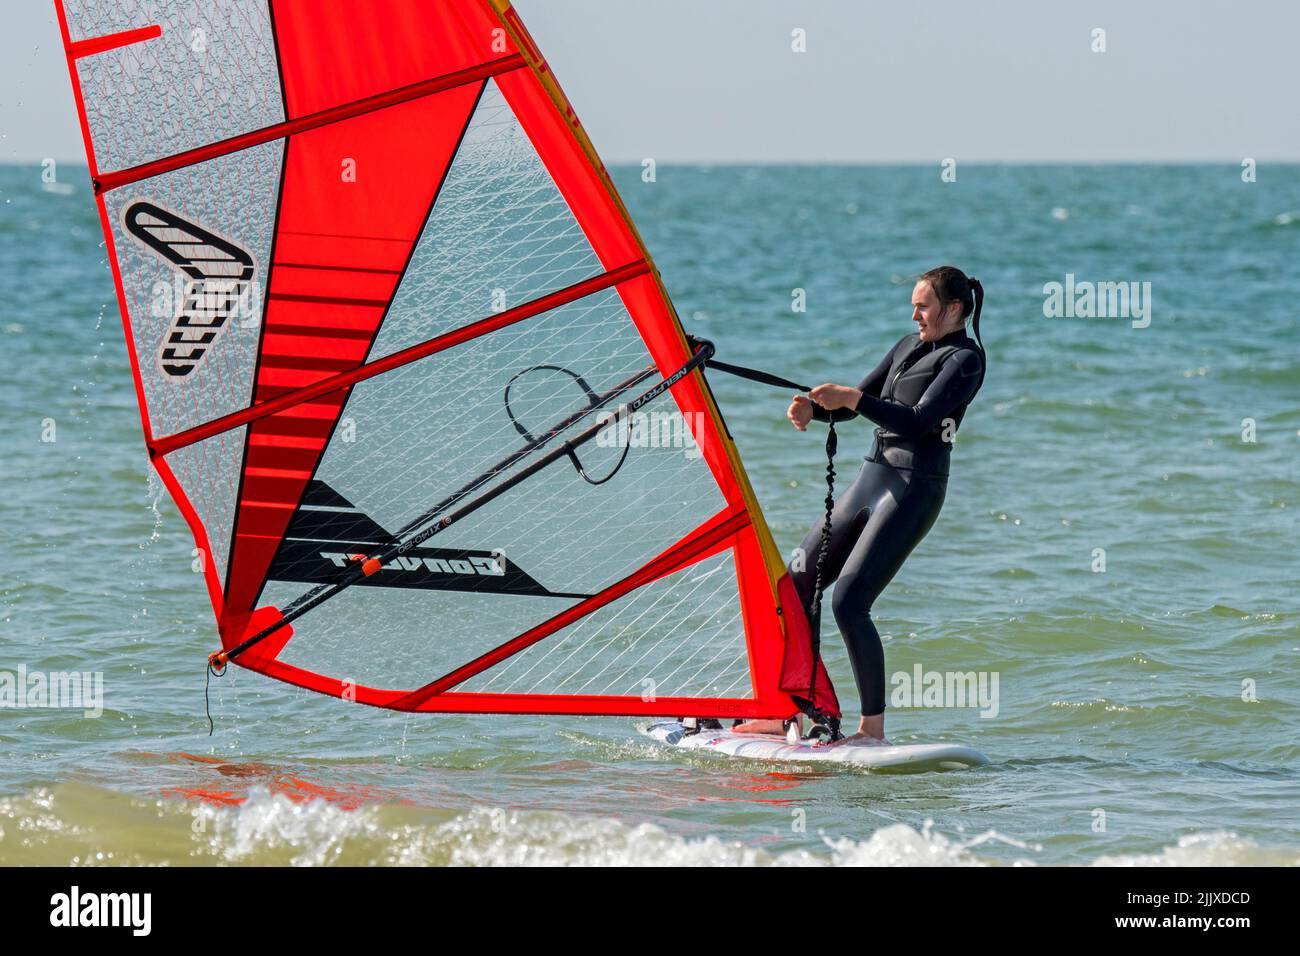 Girl / female recreational windsurfer in black wetsuit practising classic windsurfing and lifting sail at sea Stock Photo